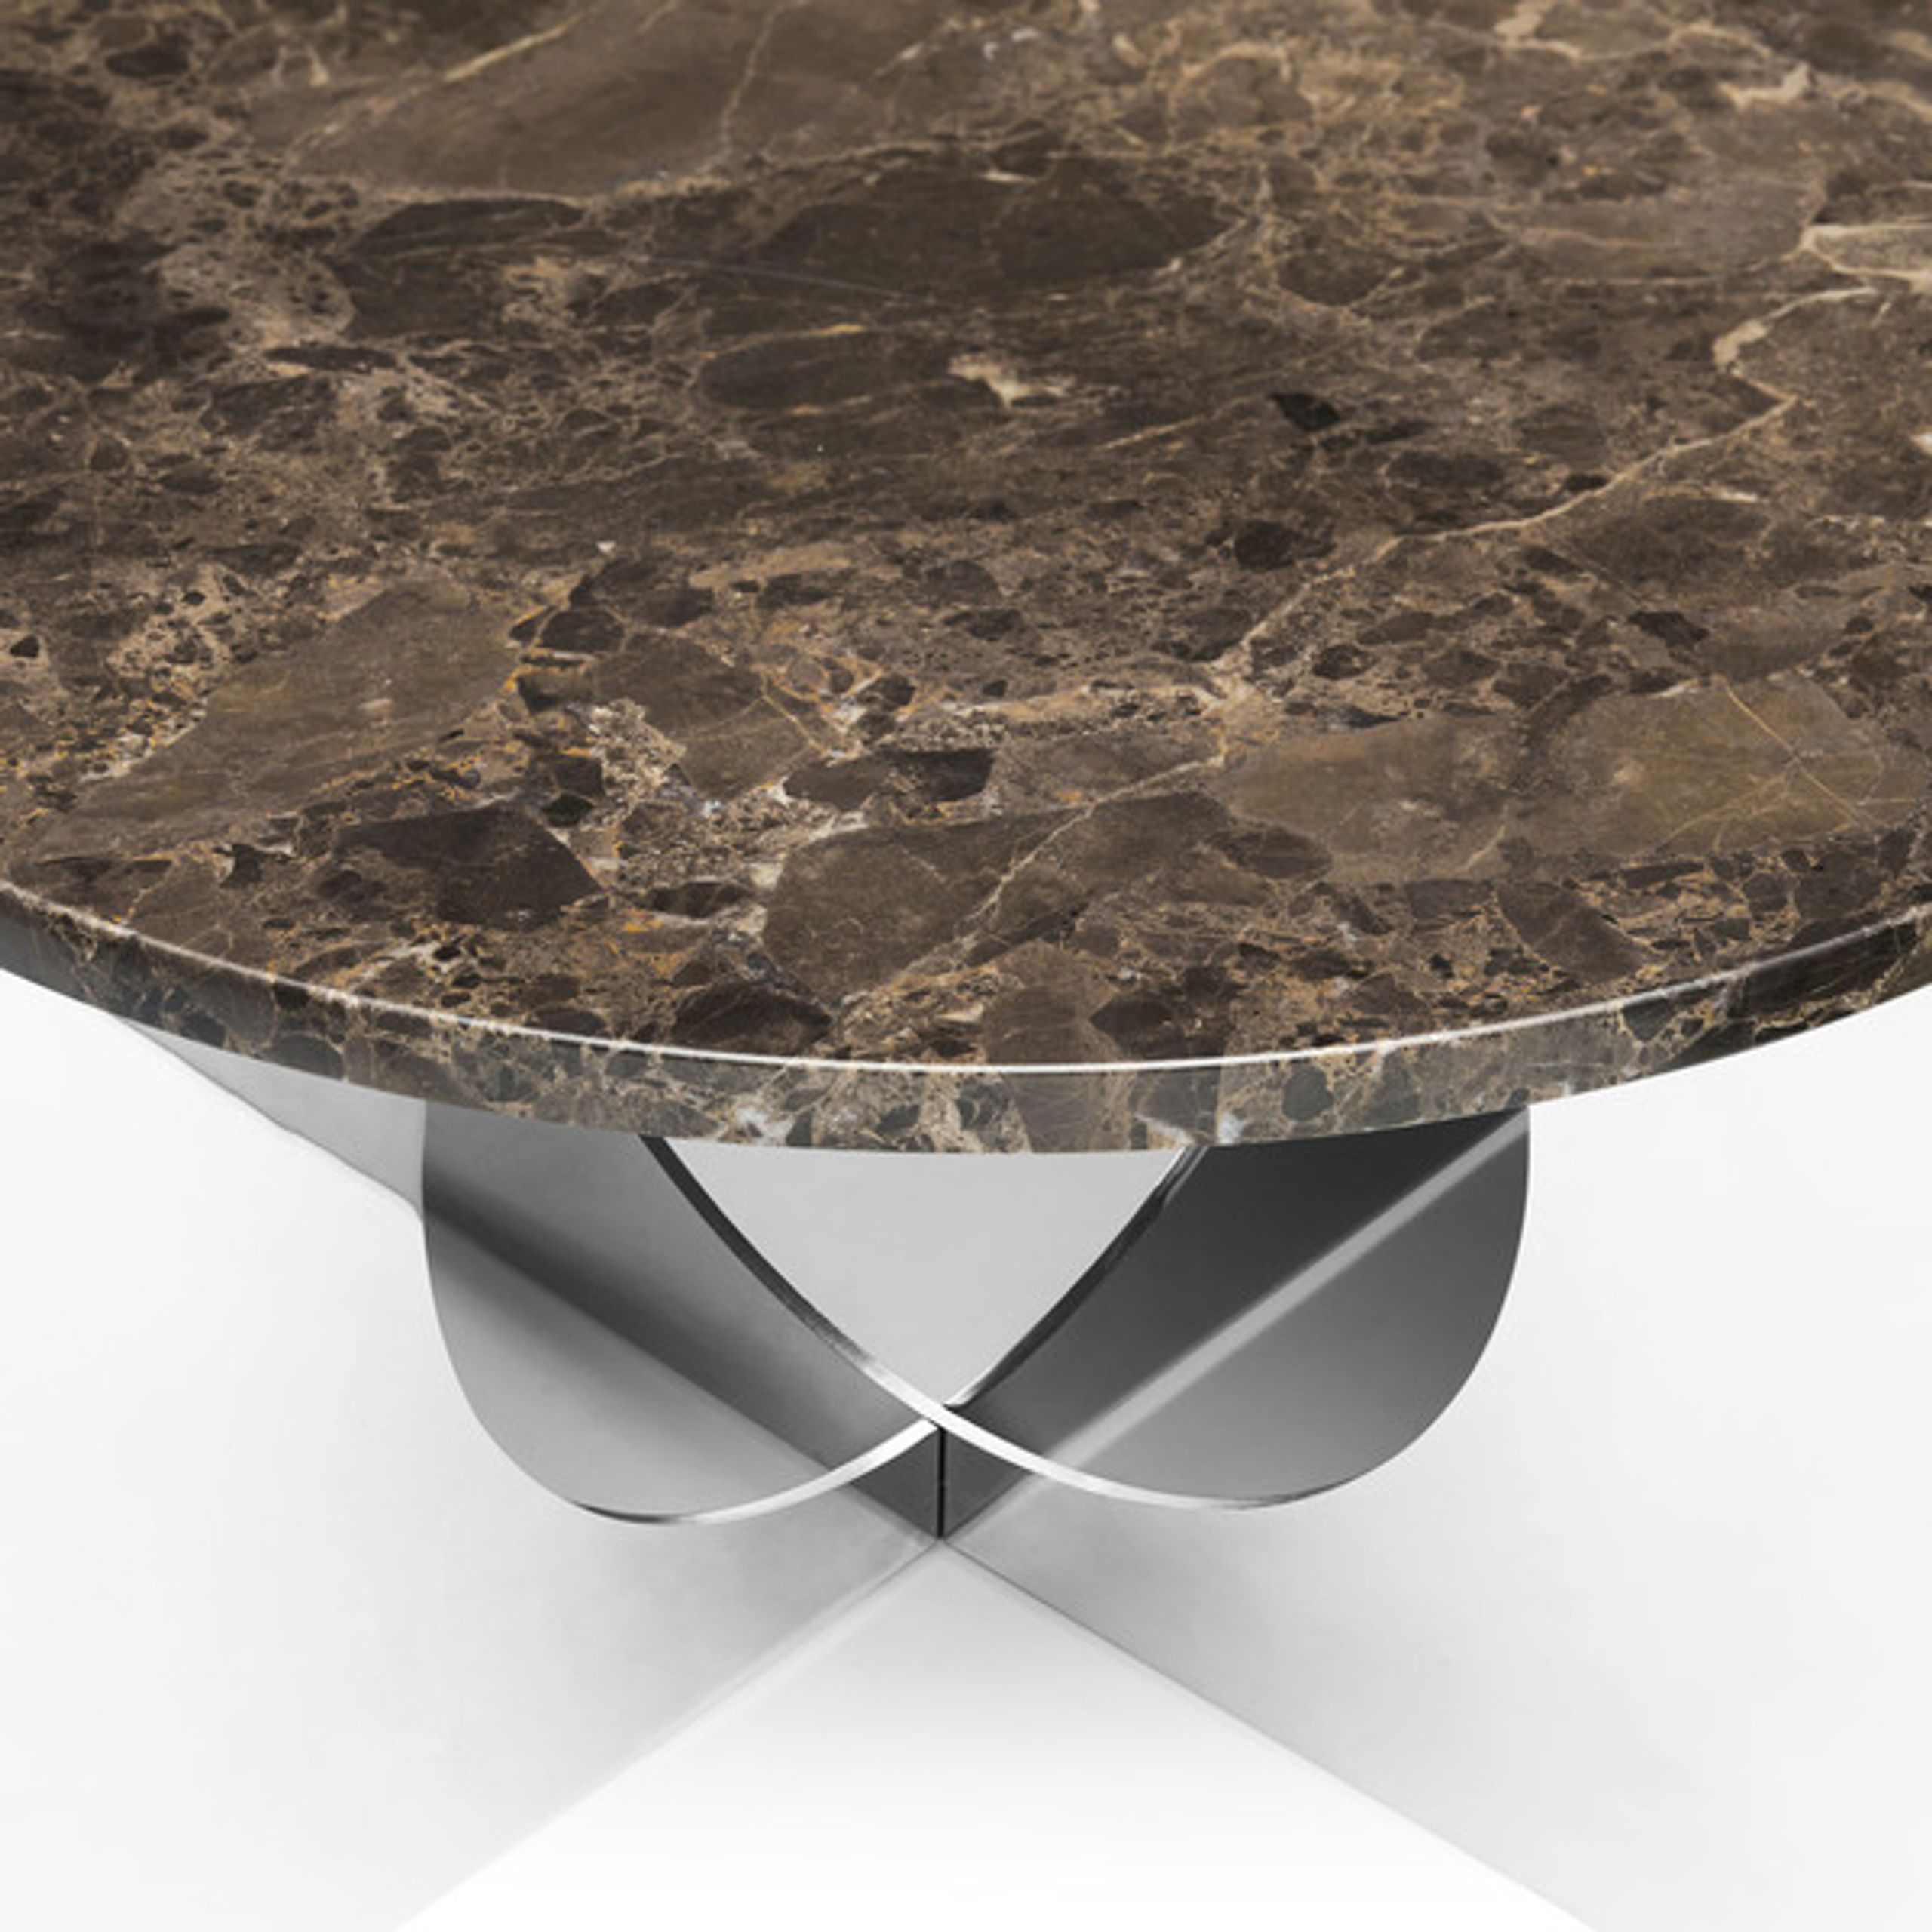 Design By Us - Mesa de centro - This Is Art Table - Marble - Brown - Chrome